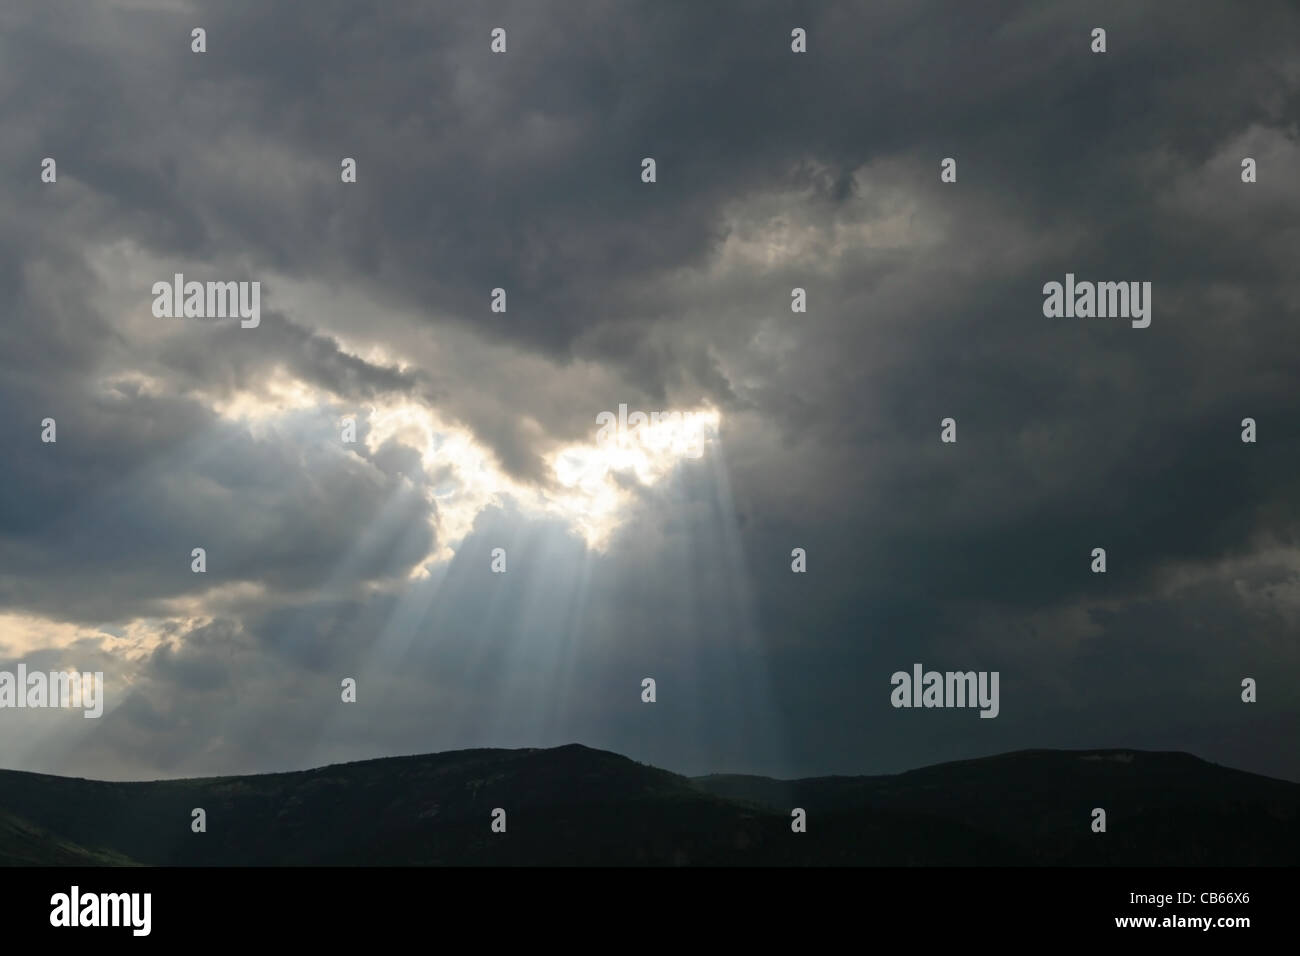 God rays emerge from dark cloudy sky over hills Stock Photo